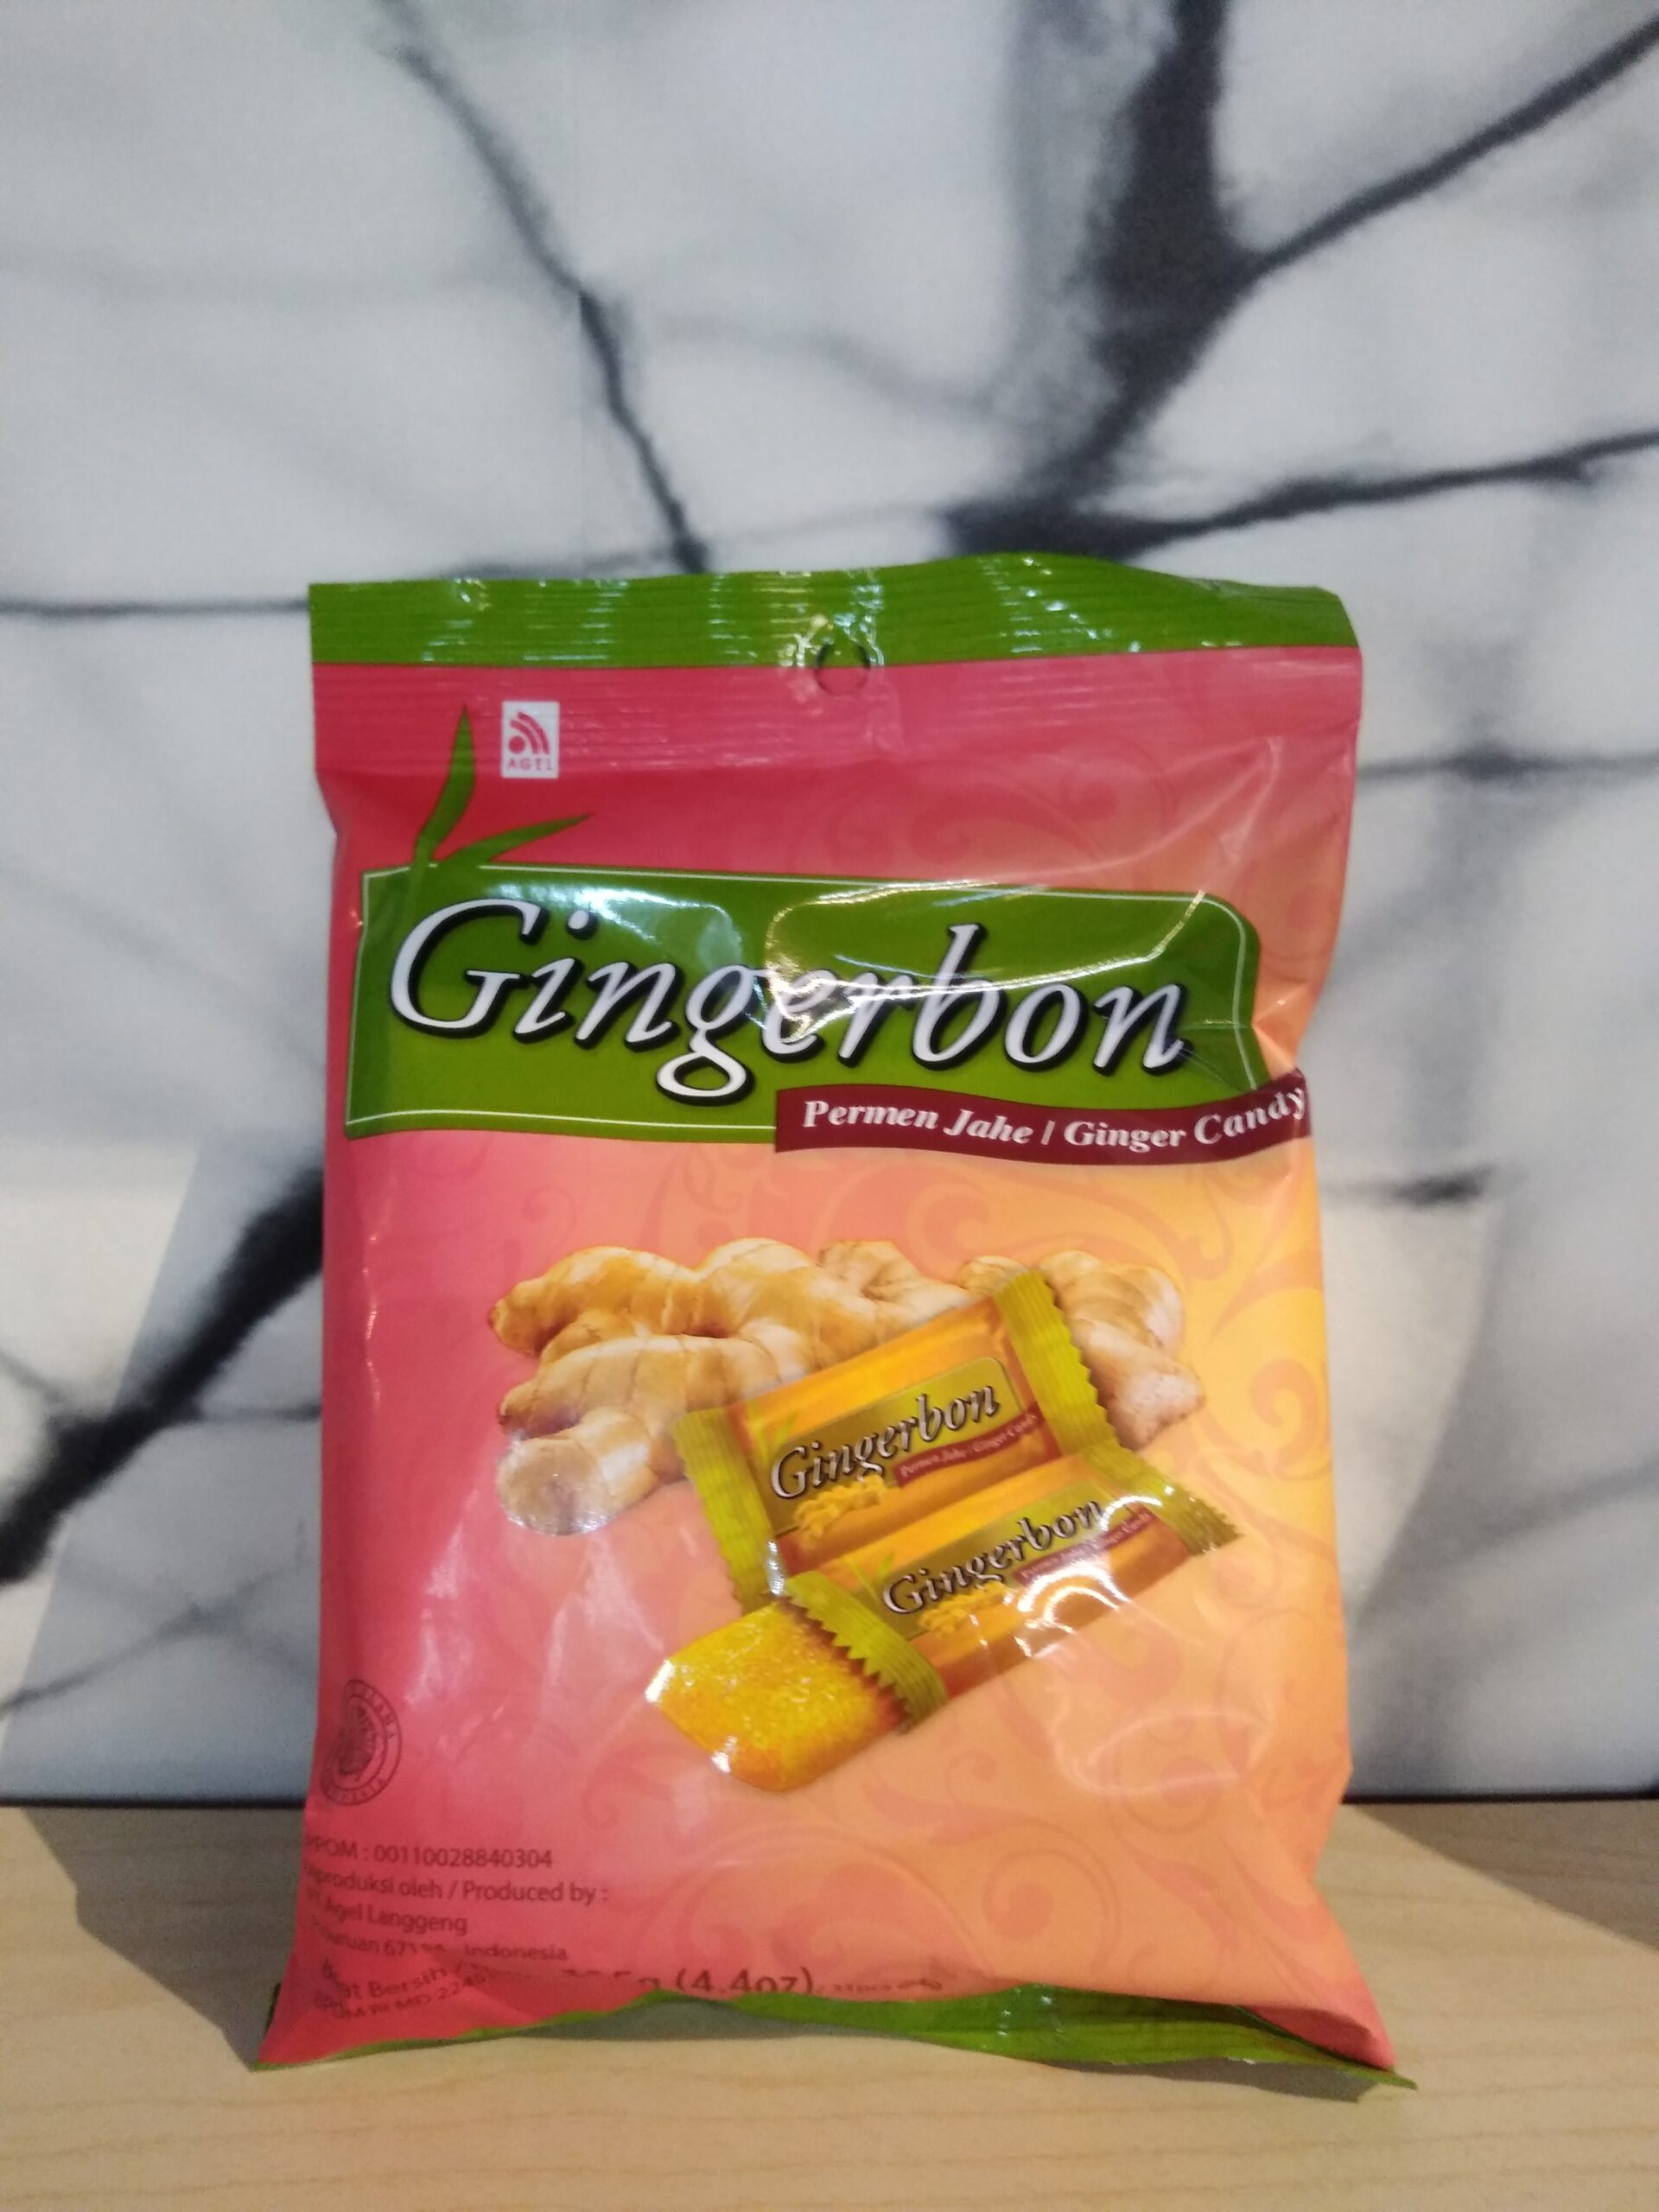 Ginger Candy Gingerbon 125g Asian Foods Hasselt 1544